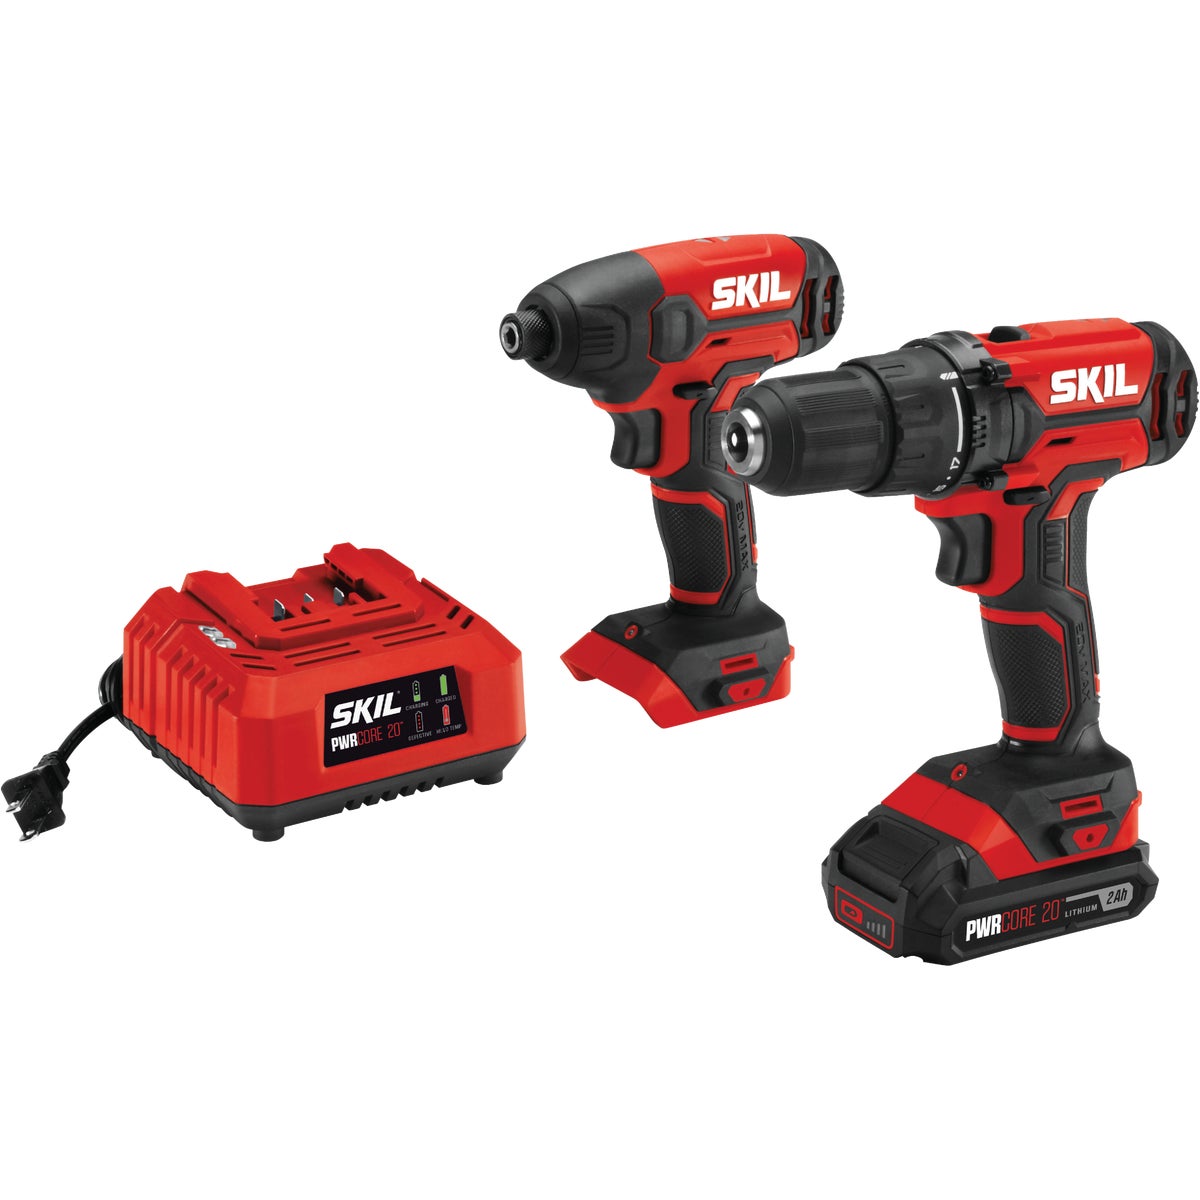 Item 376103, Kit includes 20V cordless 1/2 In. drill/driver and 1/4 In.